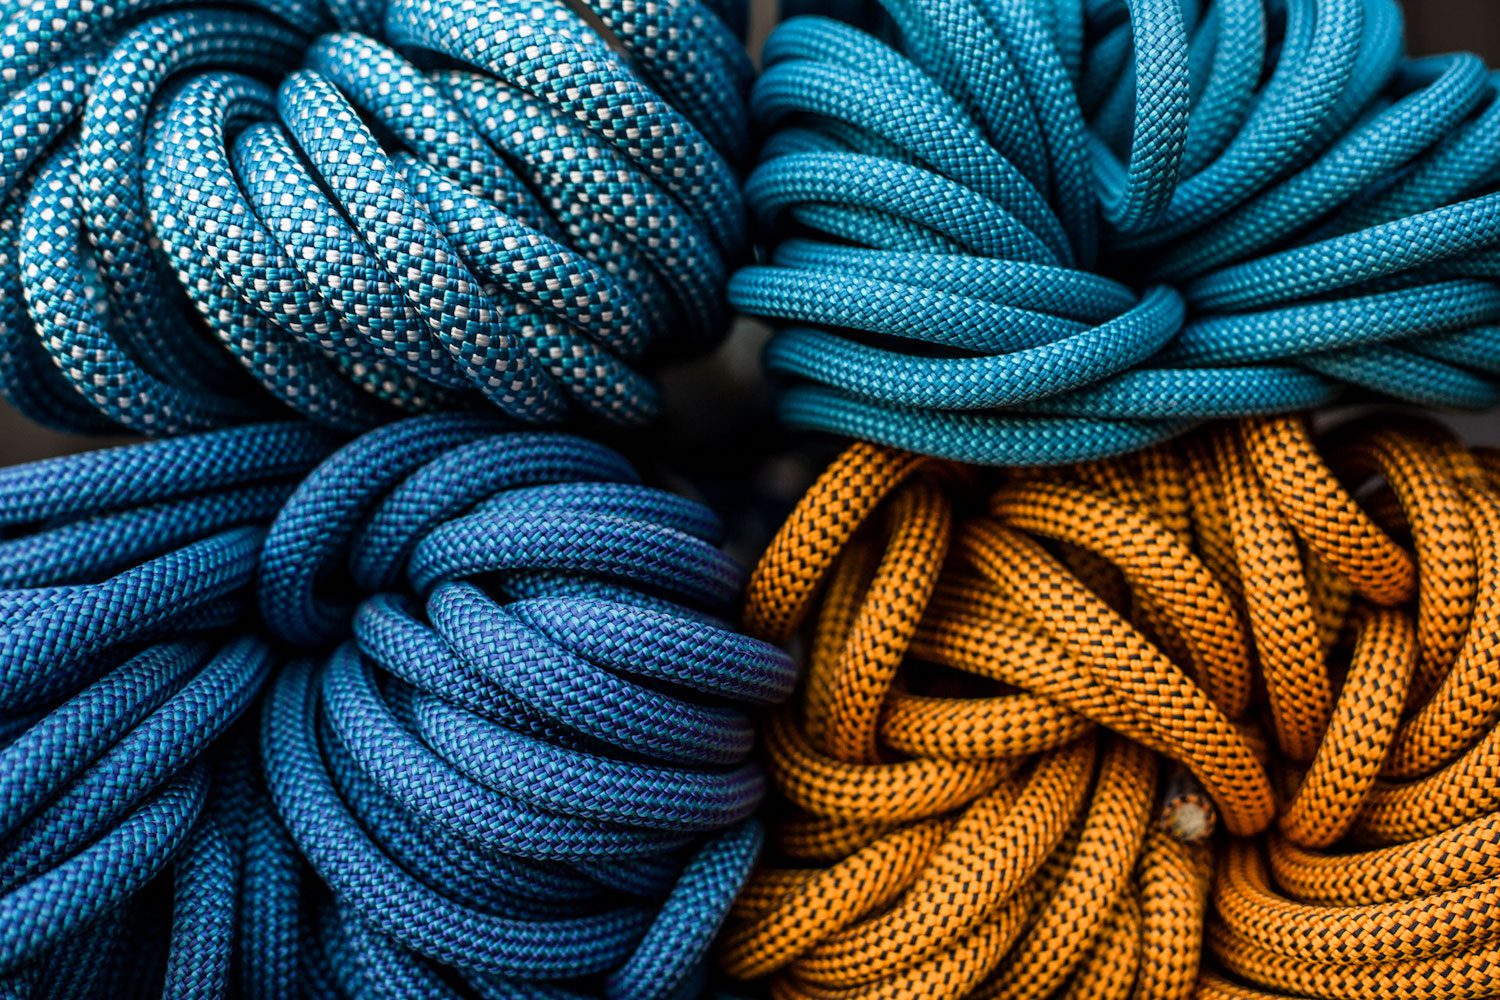 https://gripped.com/wp-content/uploads/2020/04/Rope-Coil-Challenge-1.jpg